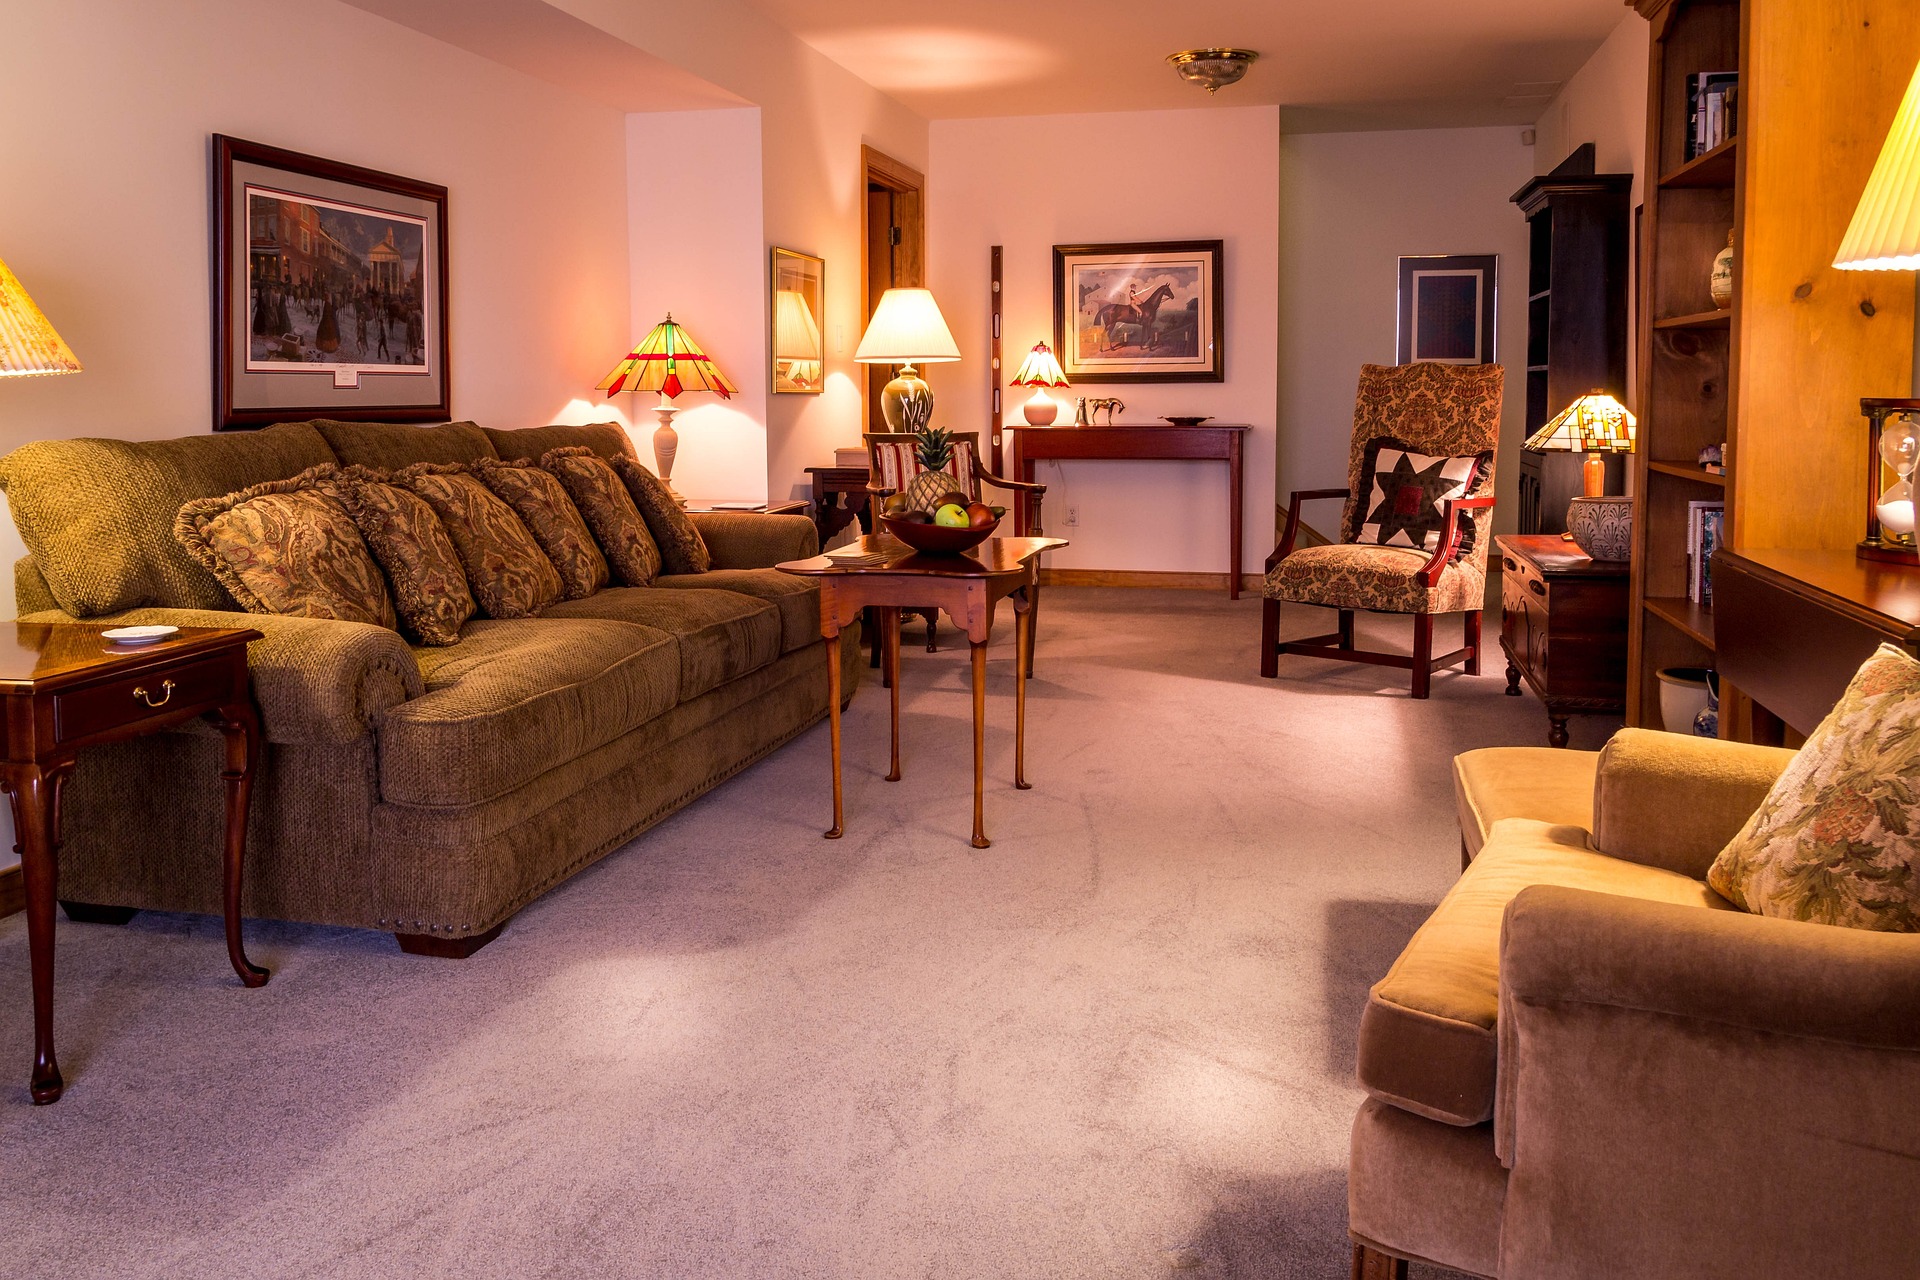 Where To Find The Ultimate Carpet Cleaners in Prescott Valley